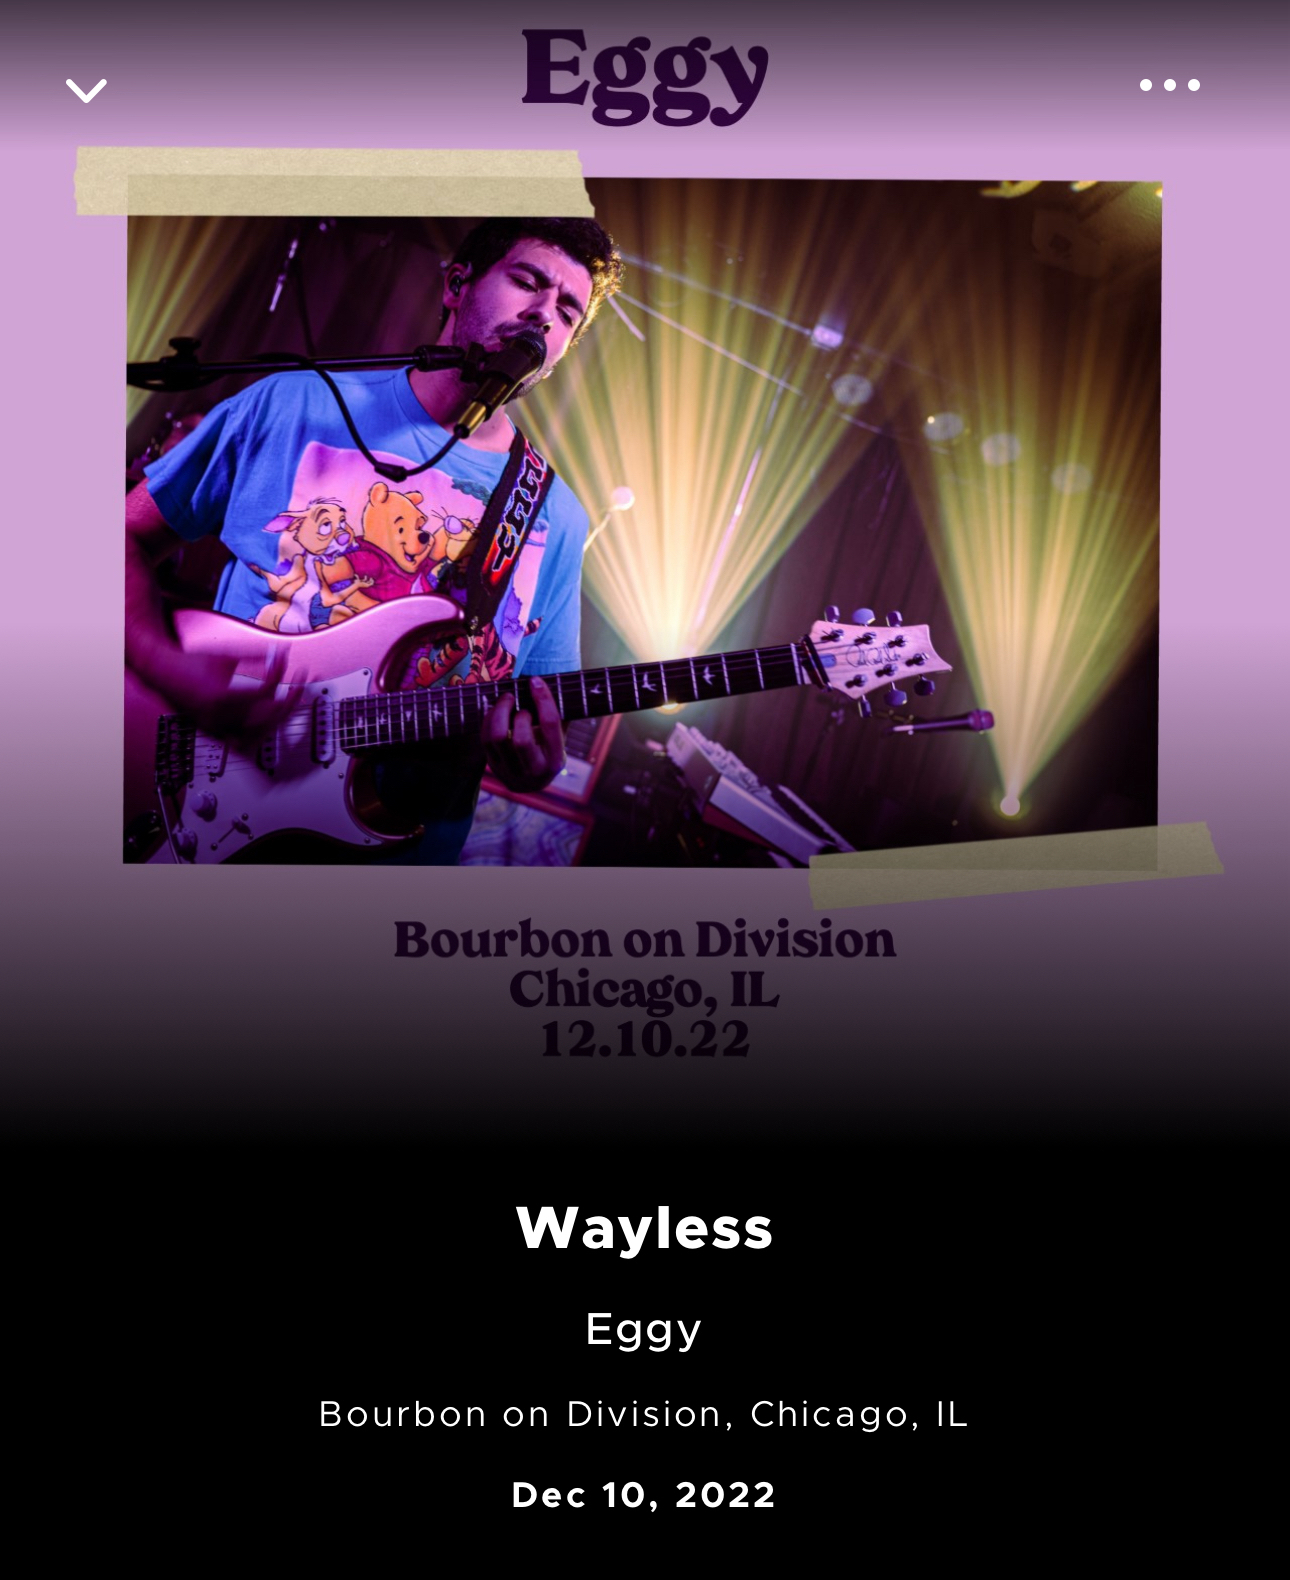 A musician playing a guitar and singing into a microphone onstage with colored stage lighting, promoting an event for the band Eggy at Bourbon on Division in Chicago, IL on December 10, 2022, with the word “Wayless” highlighted as